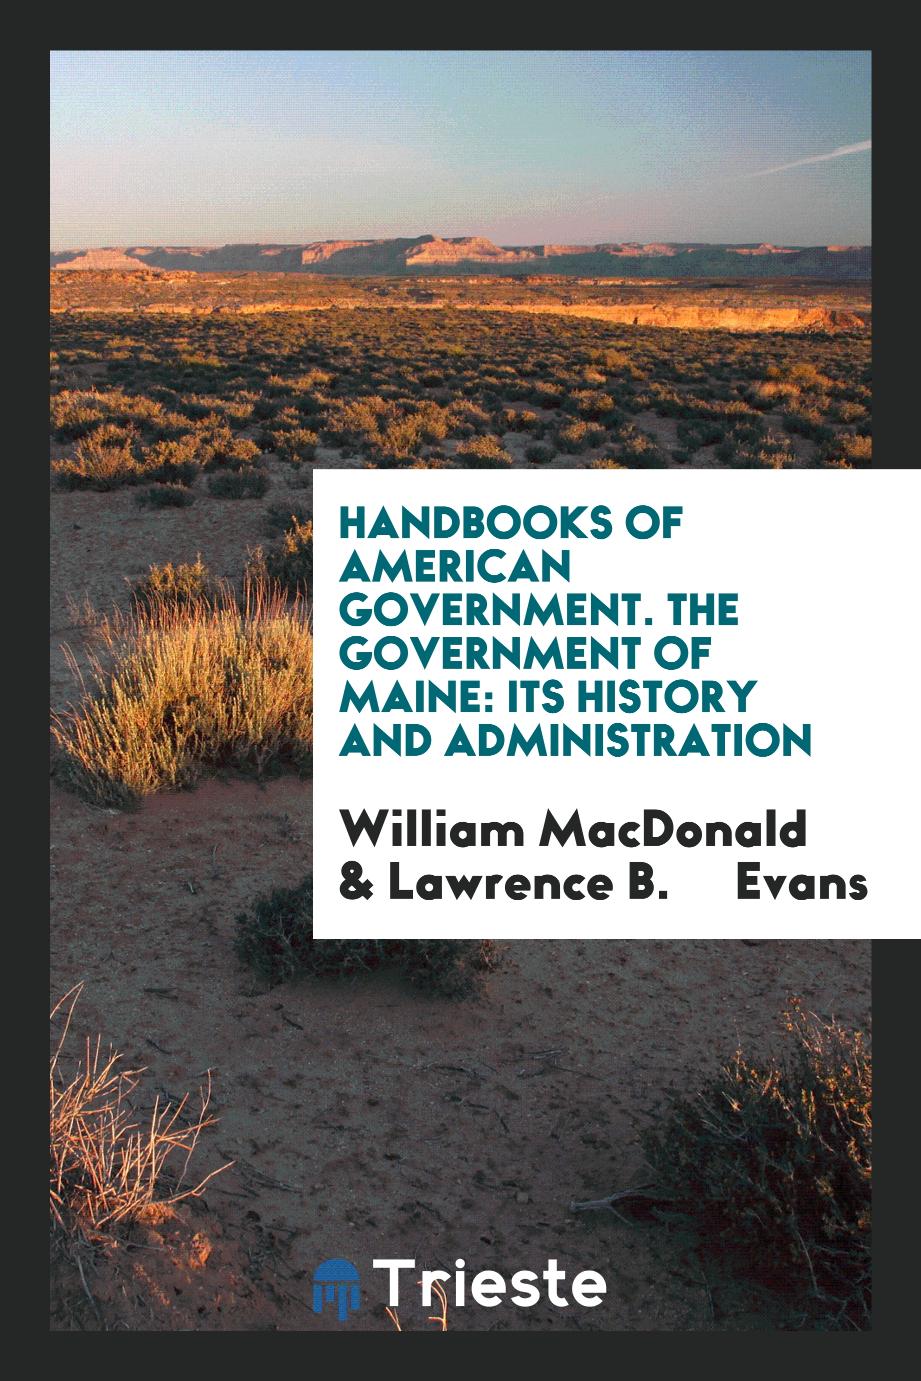 Handbooks of American Government. The Government of Maine: Its History and Administration